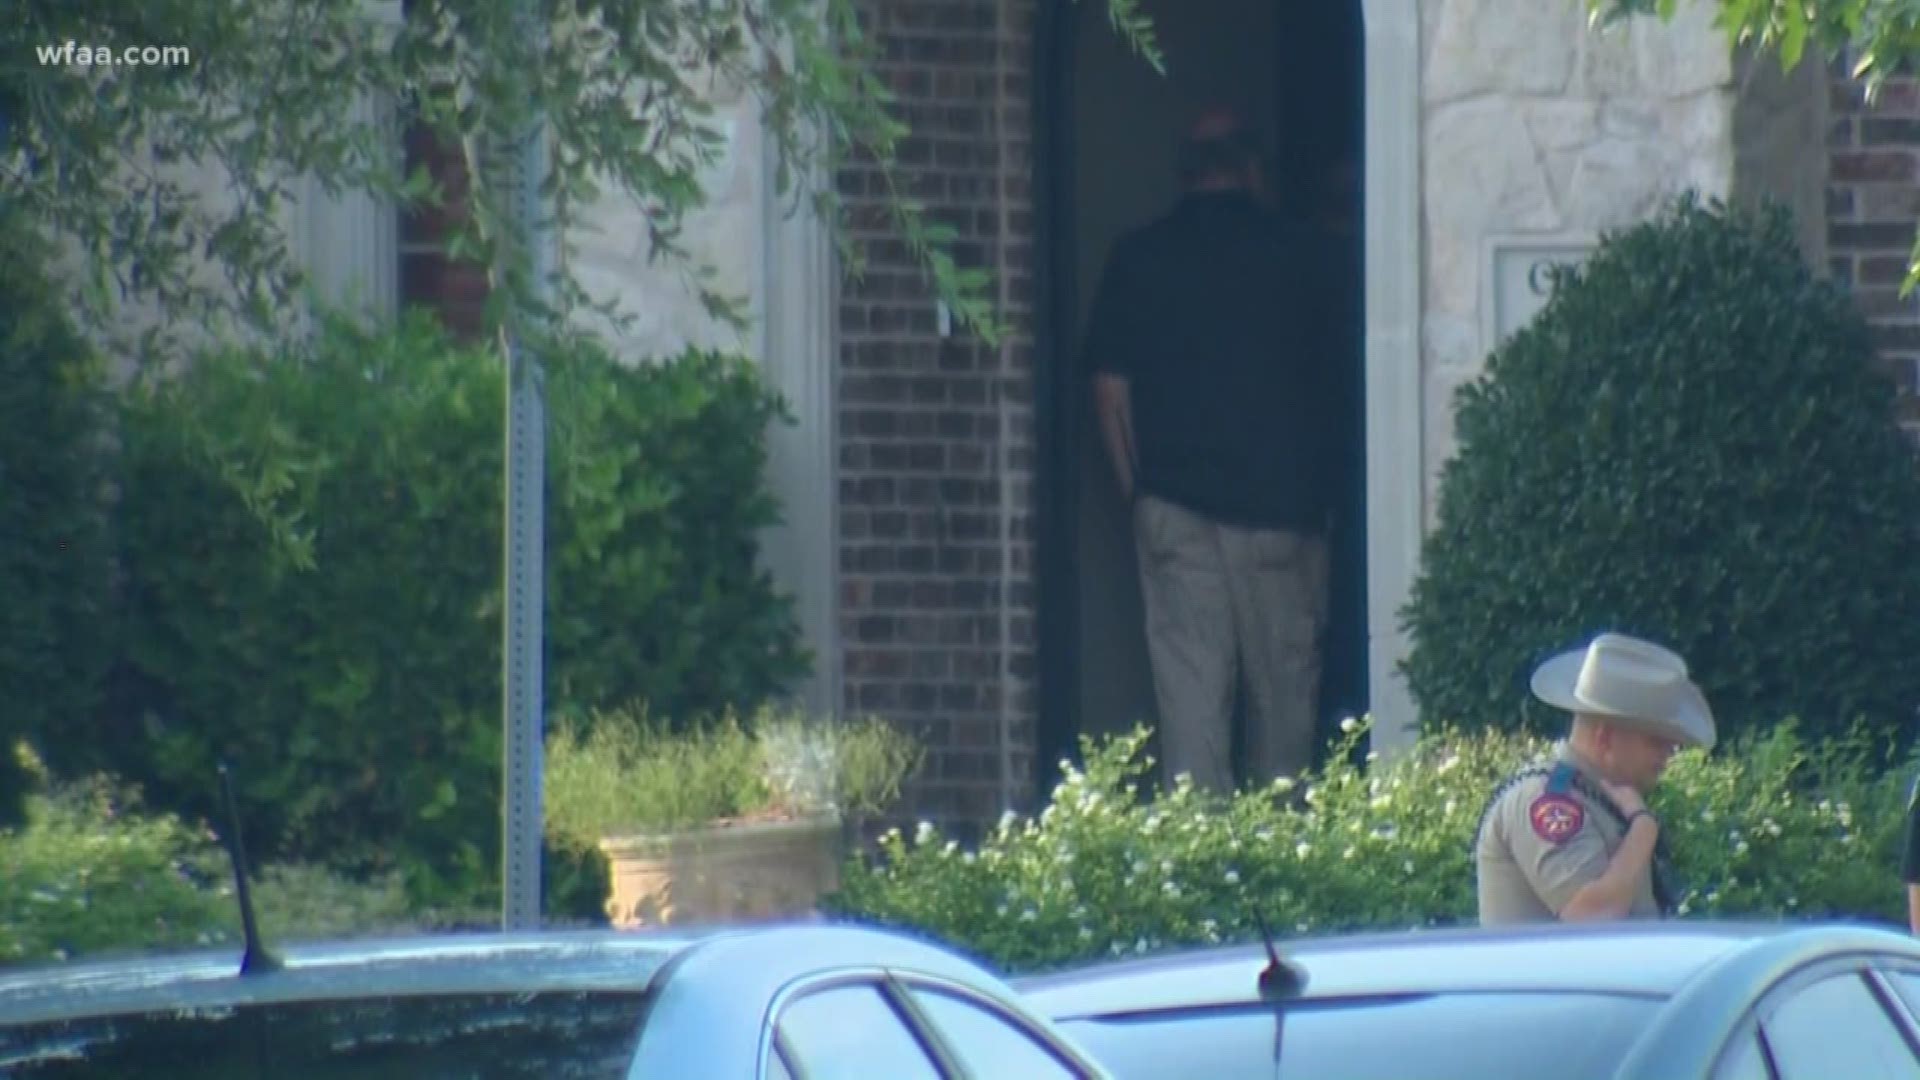 FBI and other investigators are entering a home in Allen that may be connected to the El Paso shooter.